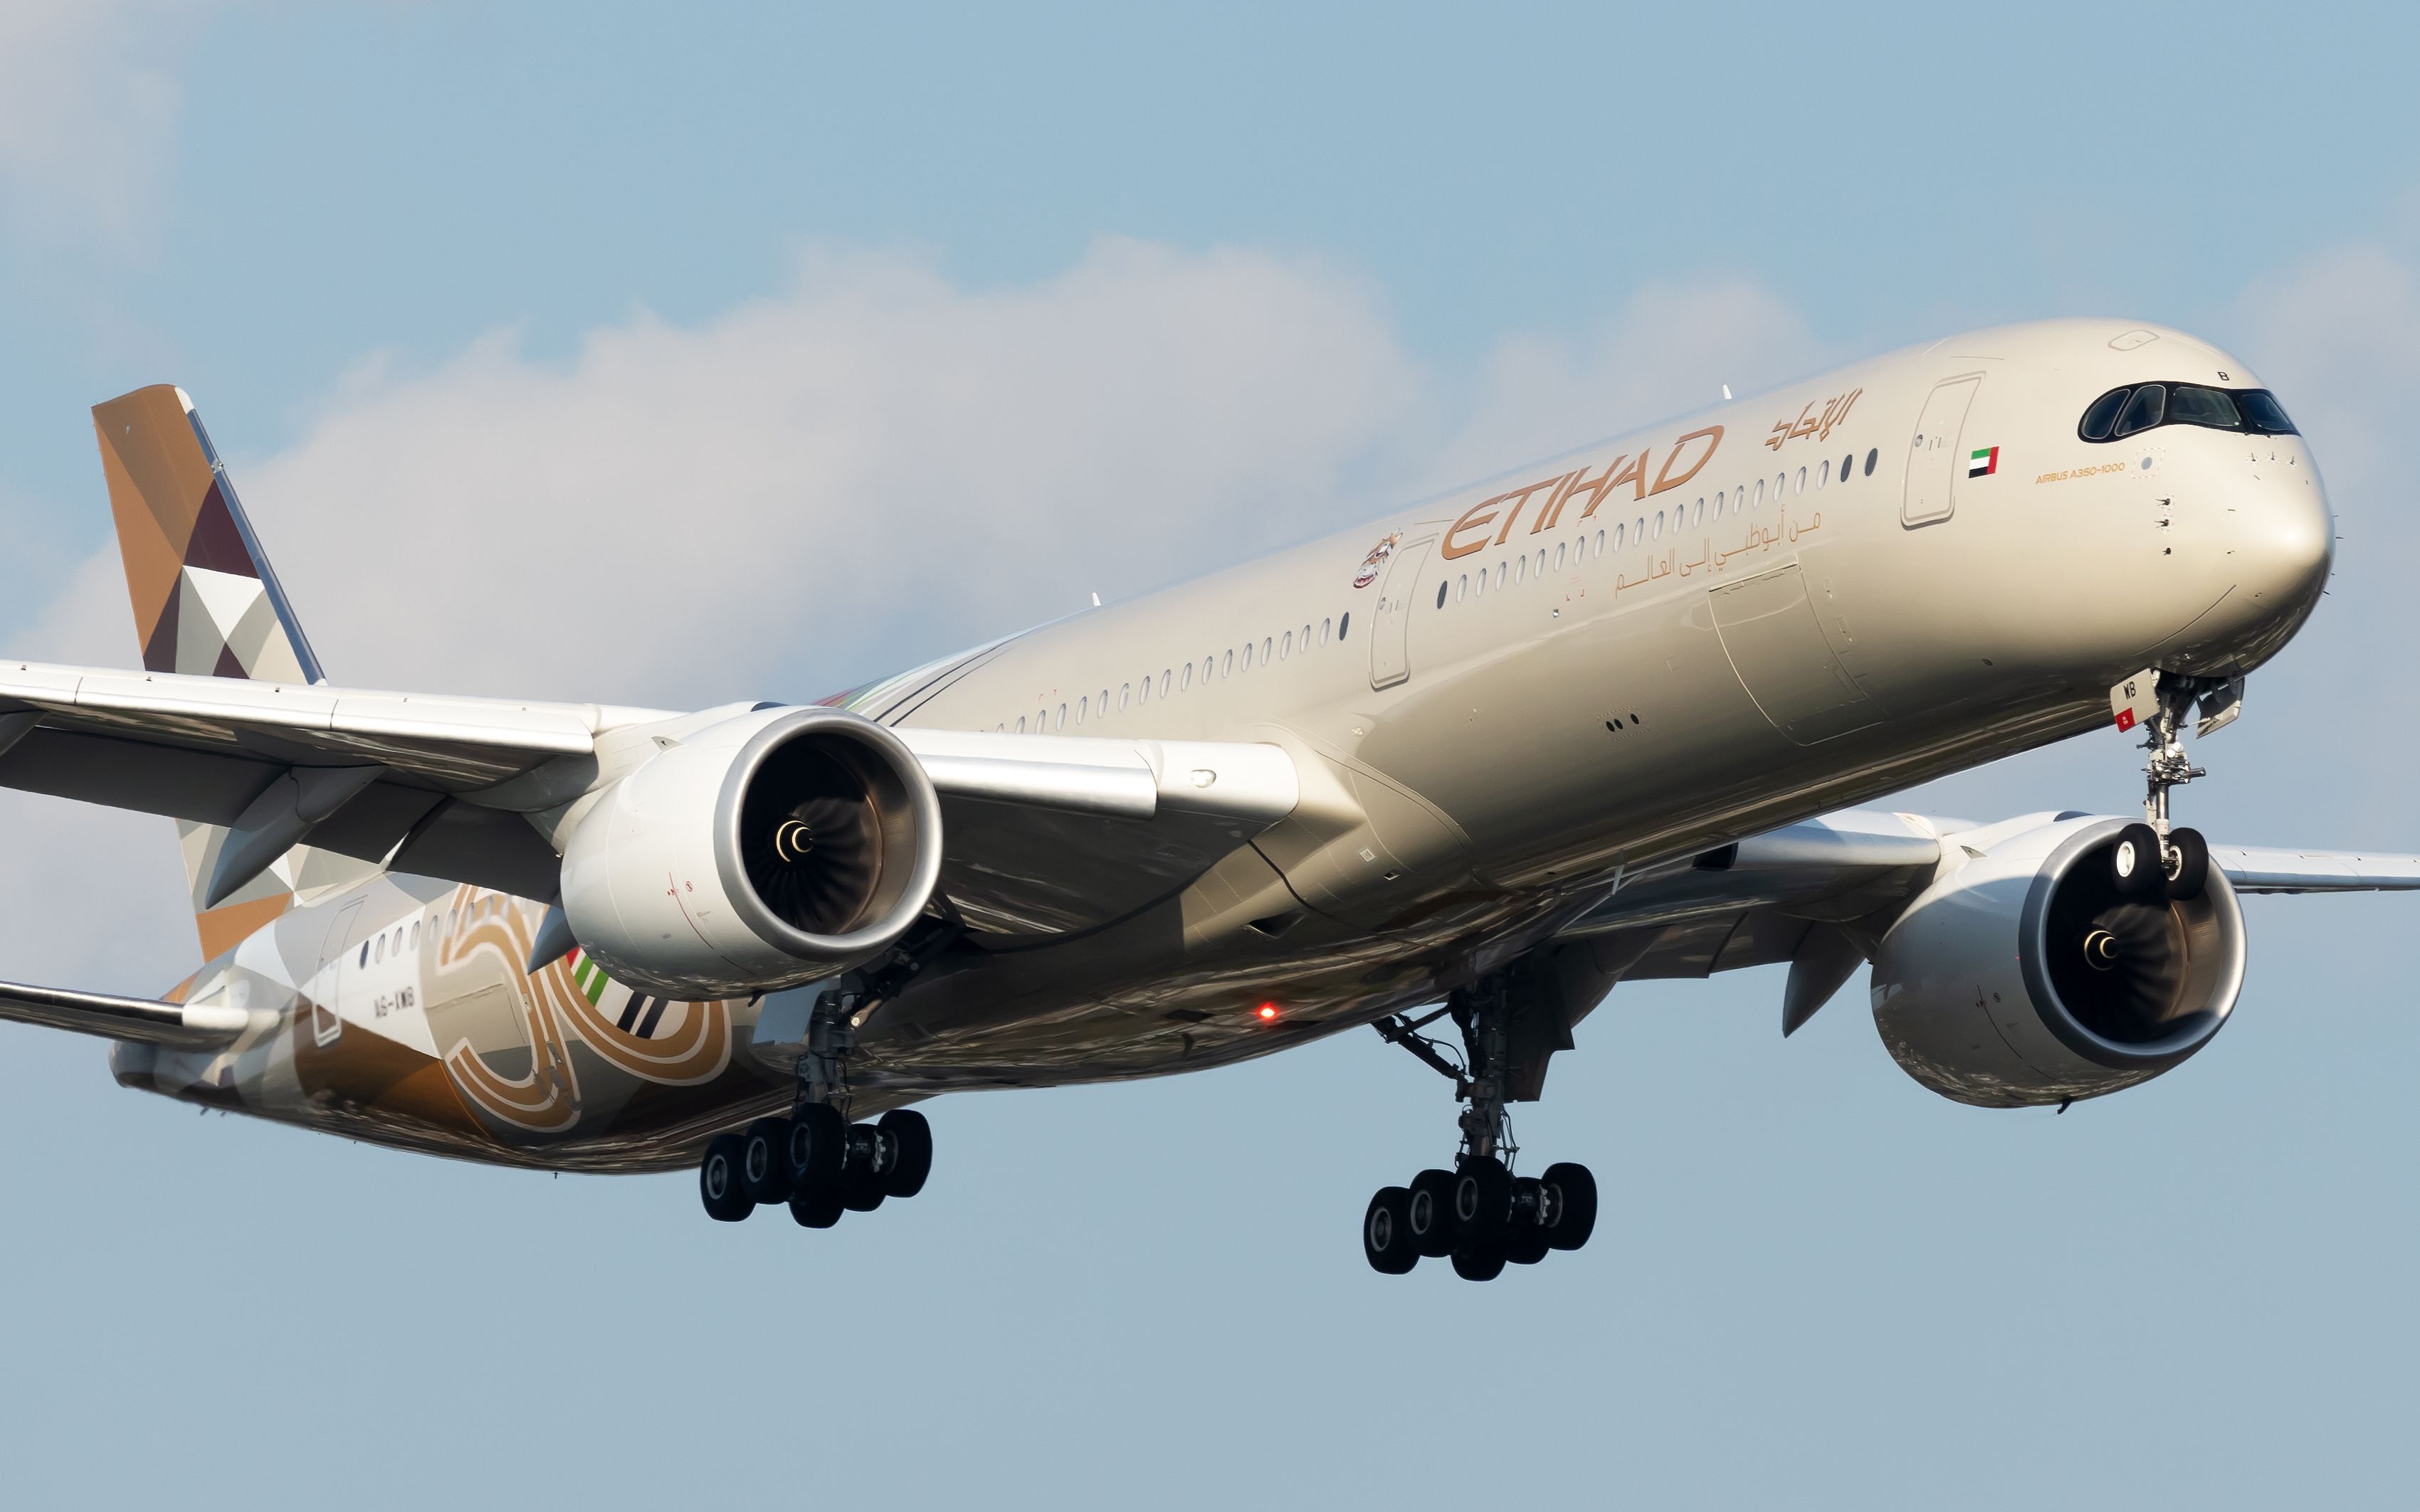 An Etihad Airways Airbus A350-1041 in 50 Years Livery flying in the sky.